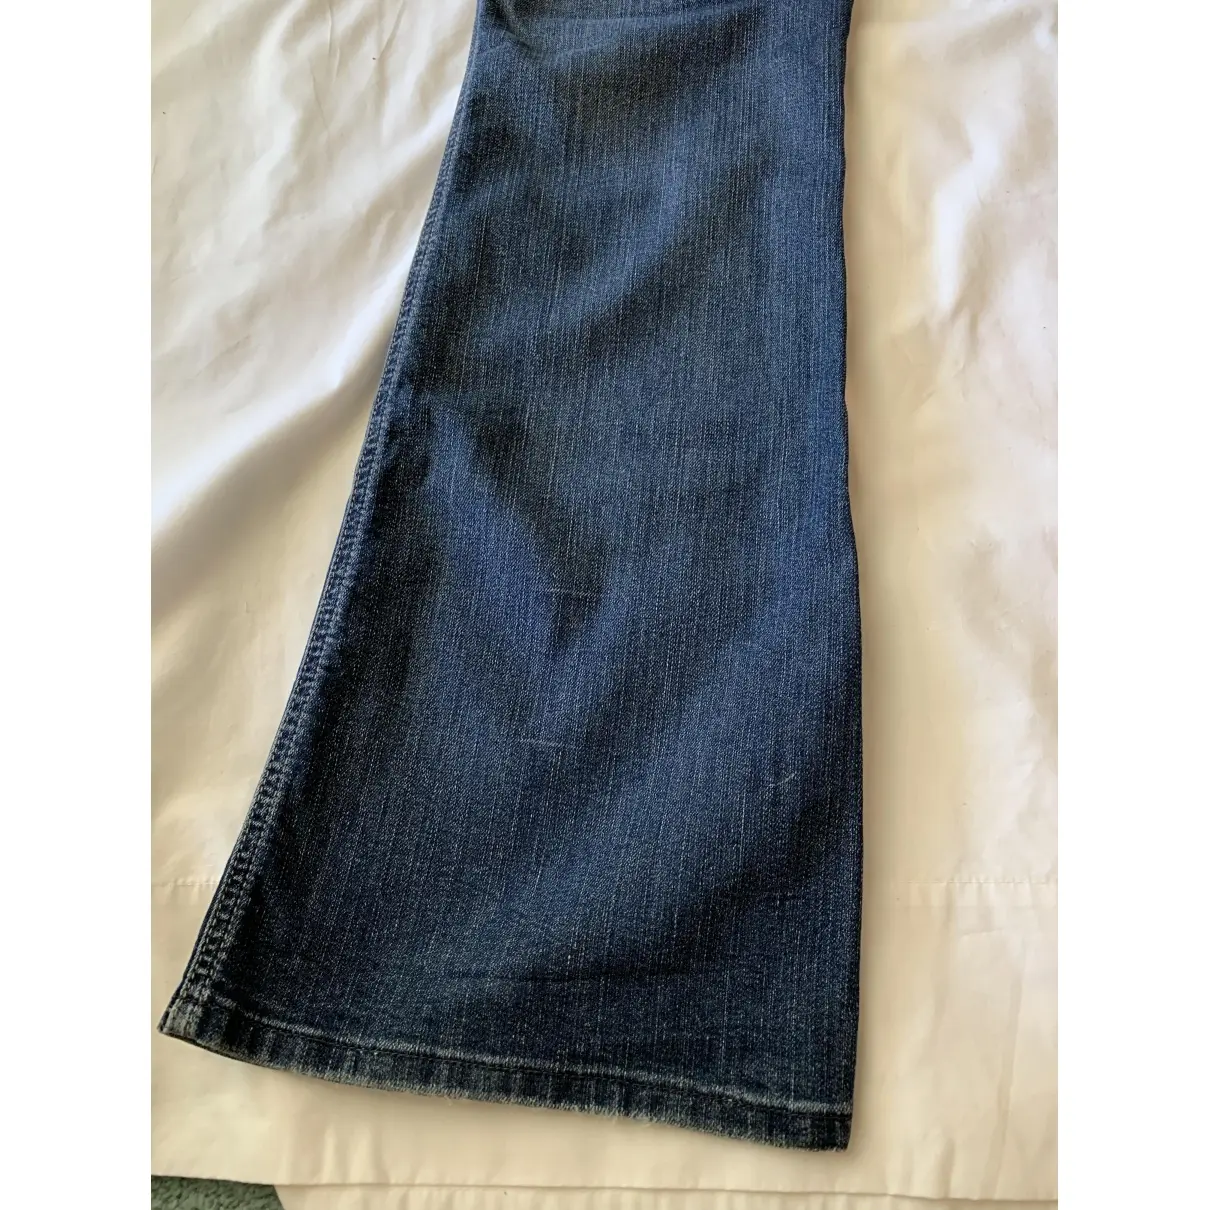 Cotton Jeans 7 For All Mankind